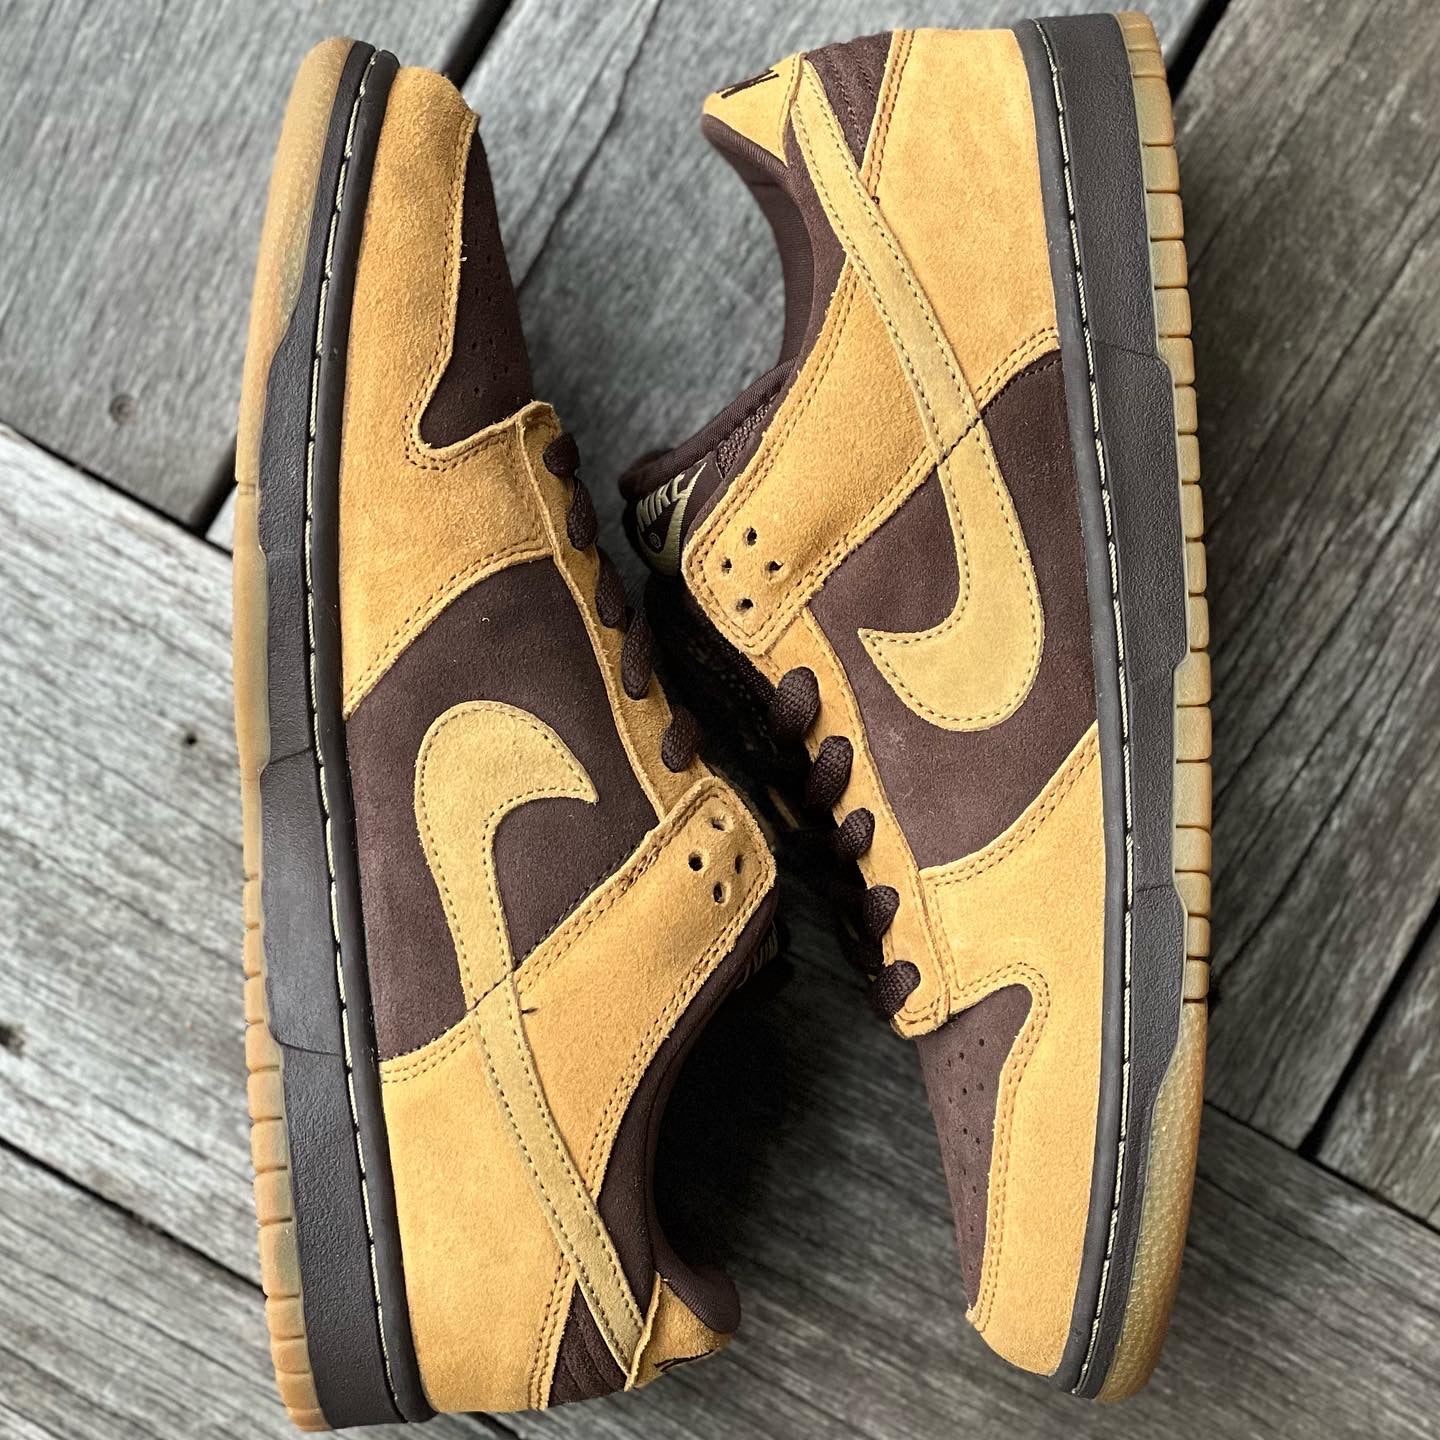 Nike SB Dunk Low Brown Pack Size 10.5